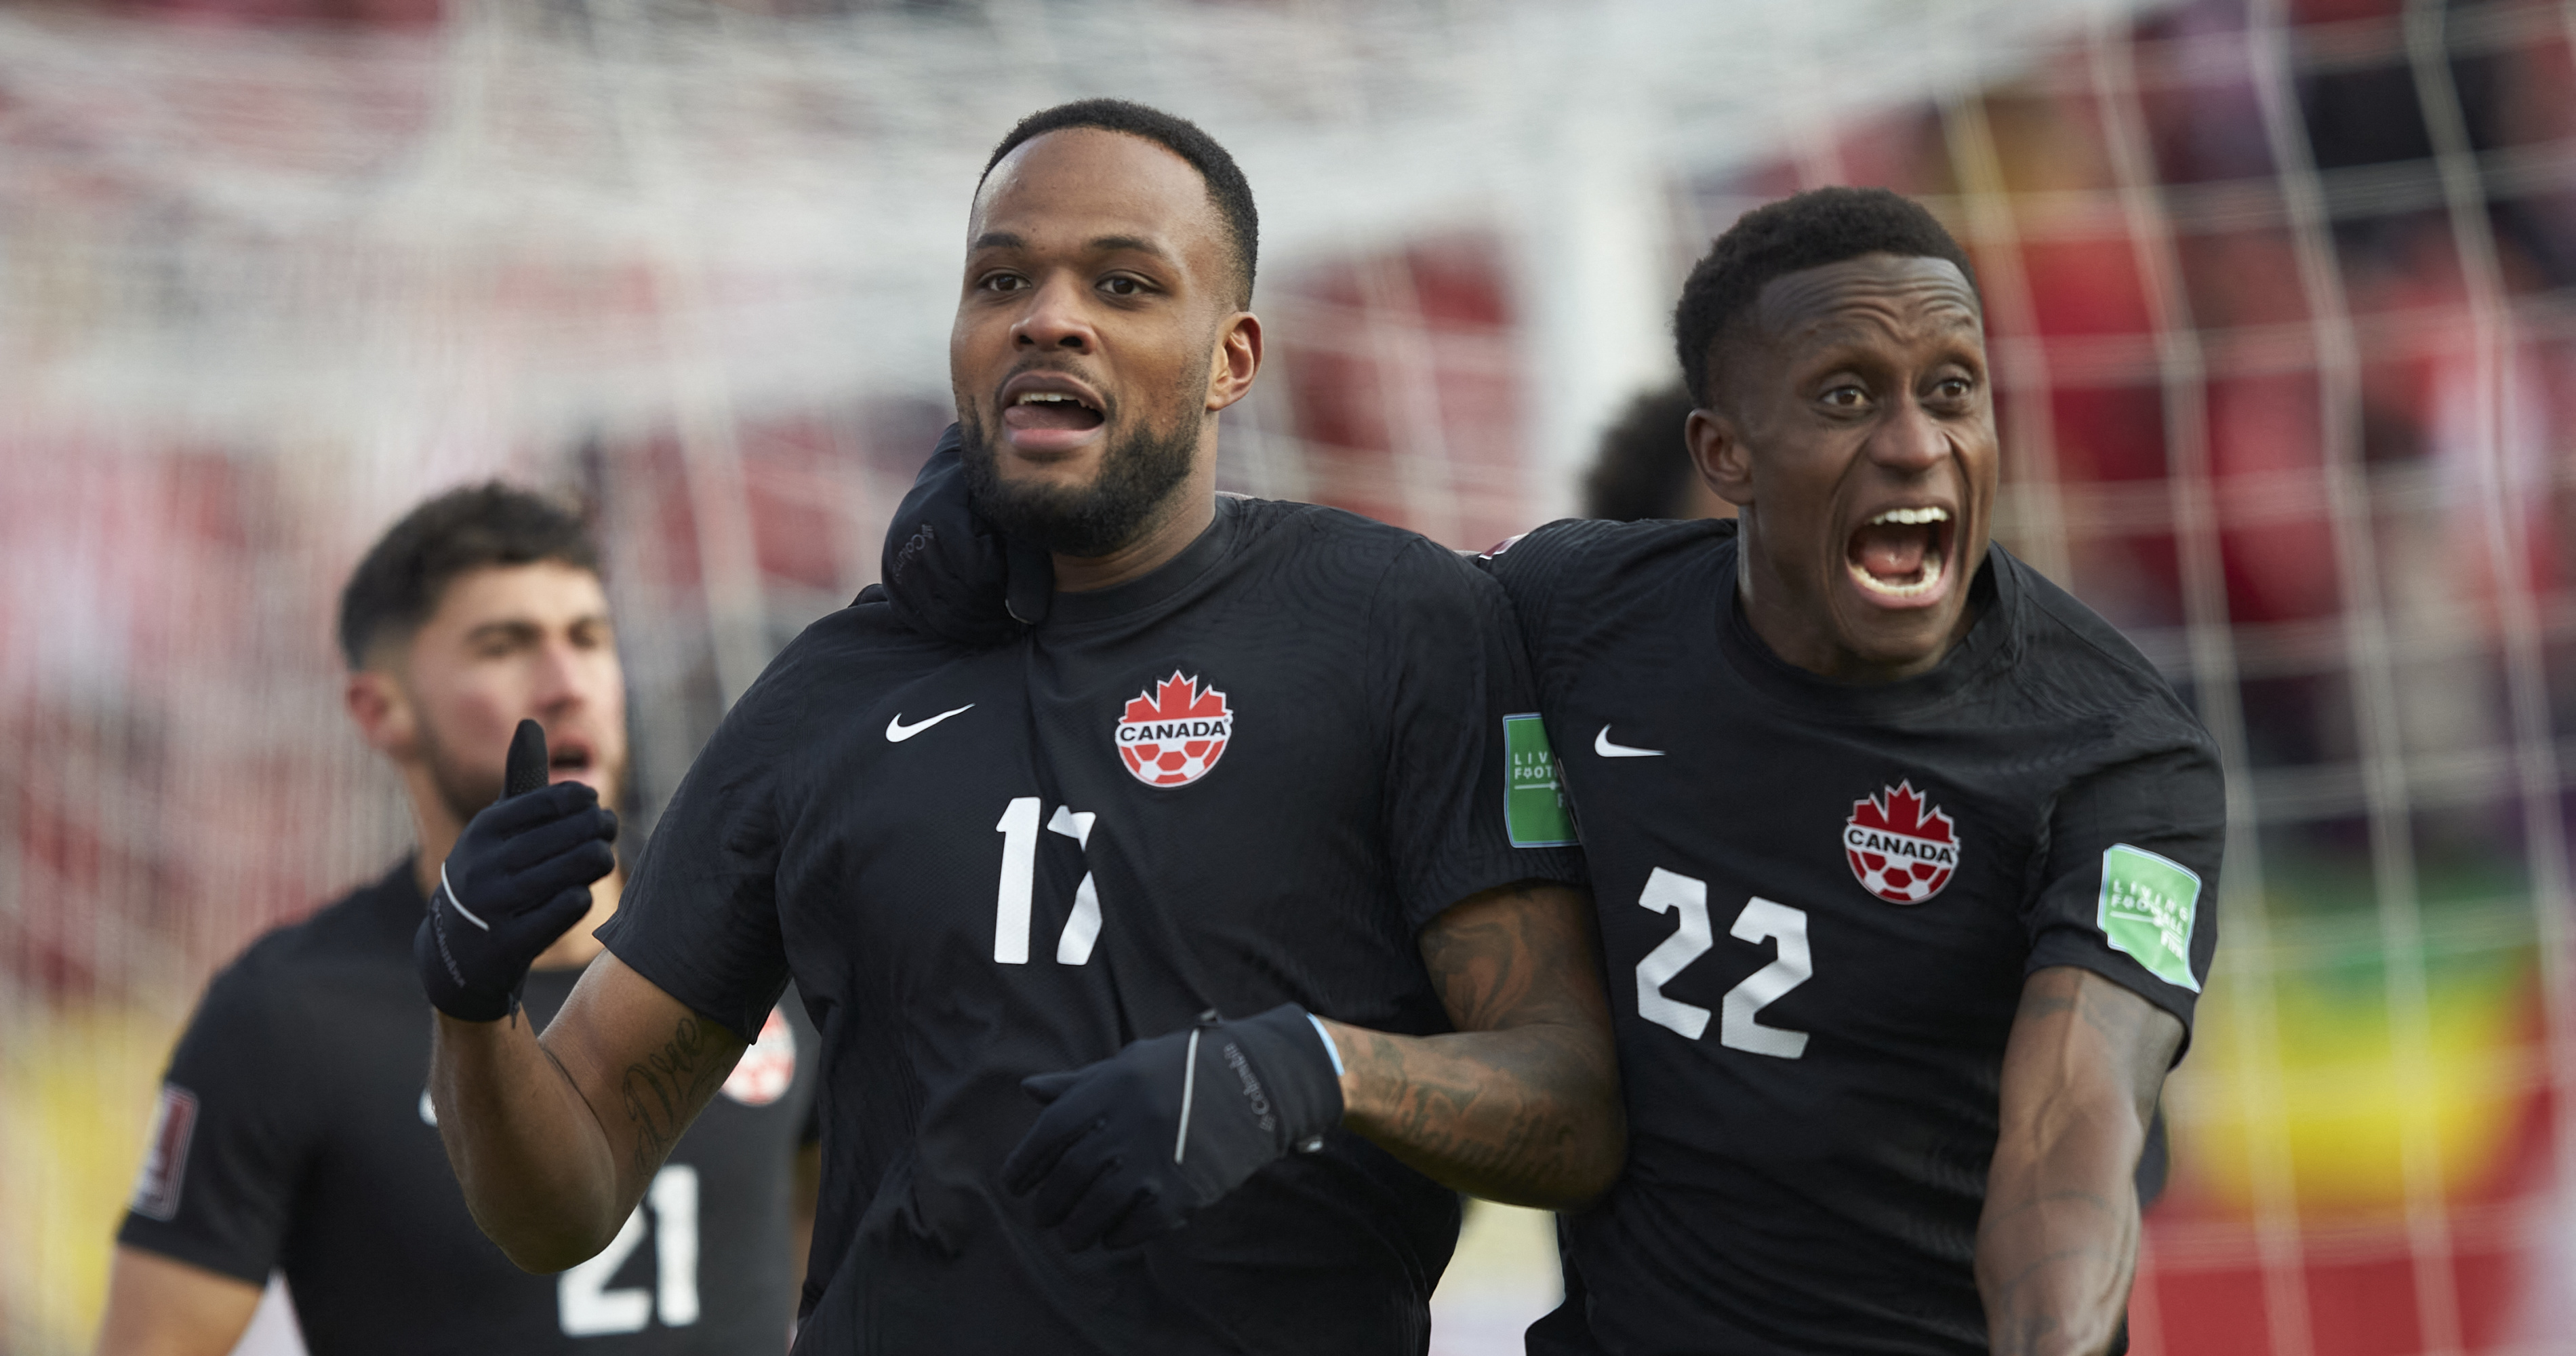 Canada Beats USMNT 20 to Remain Undefeated in 2022 World Cup